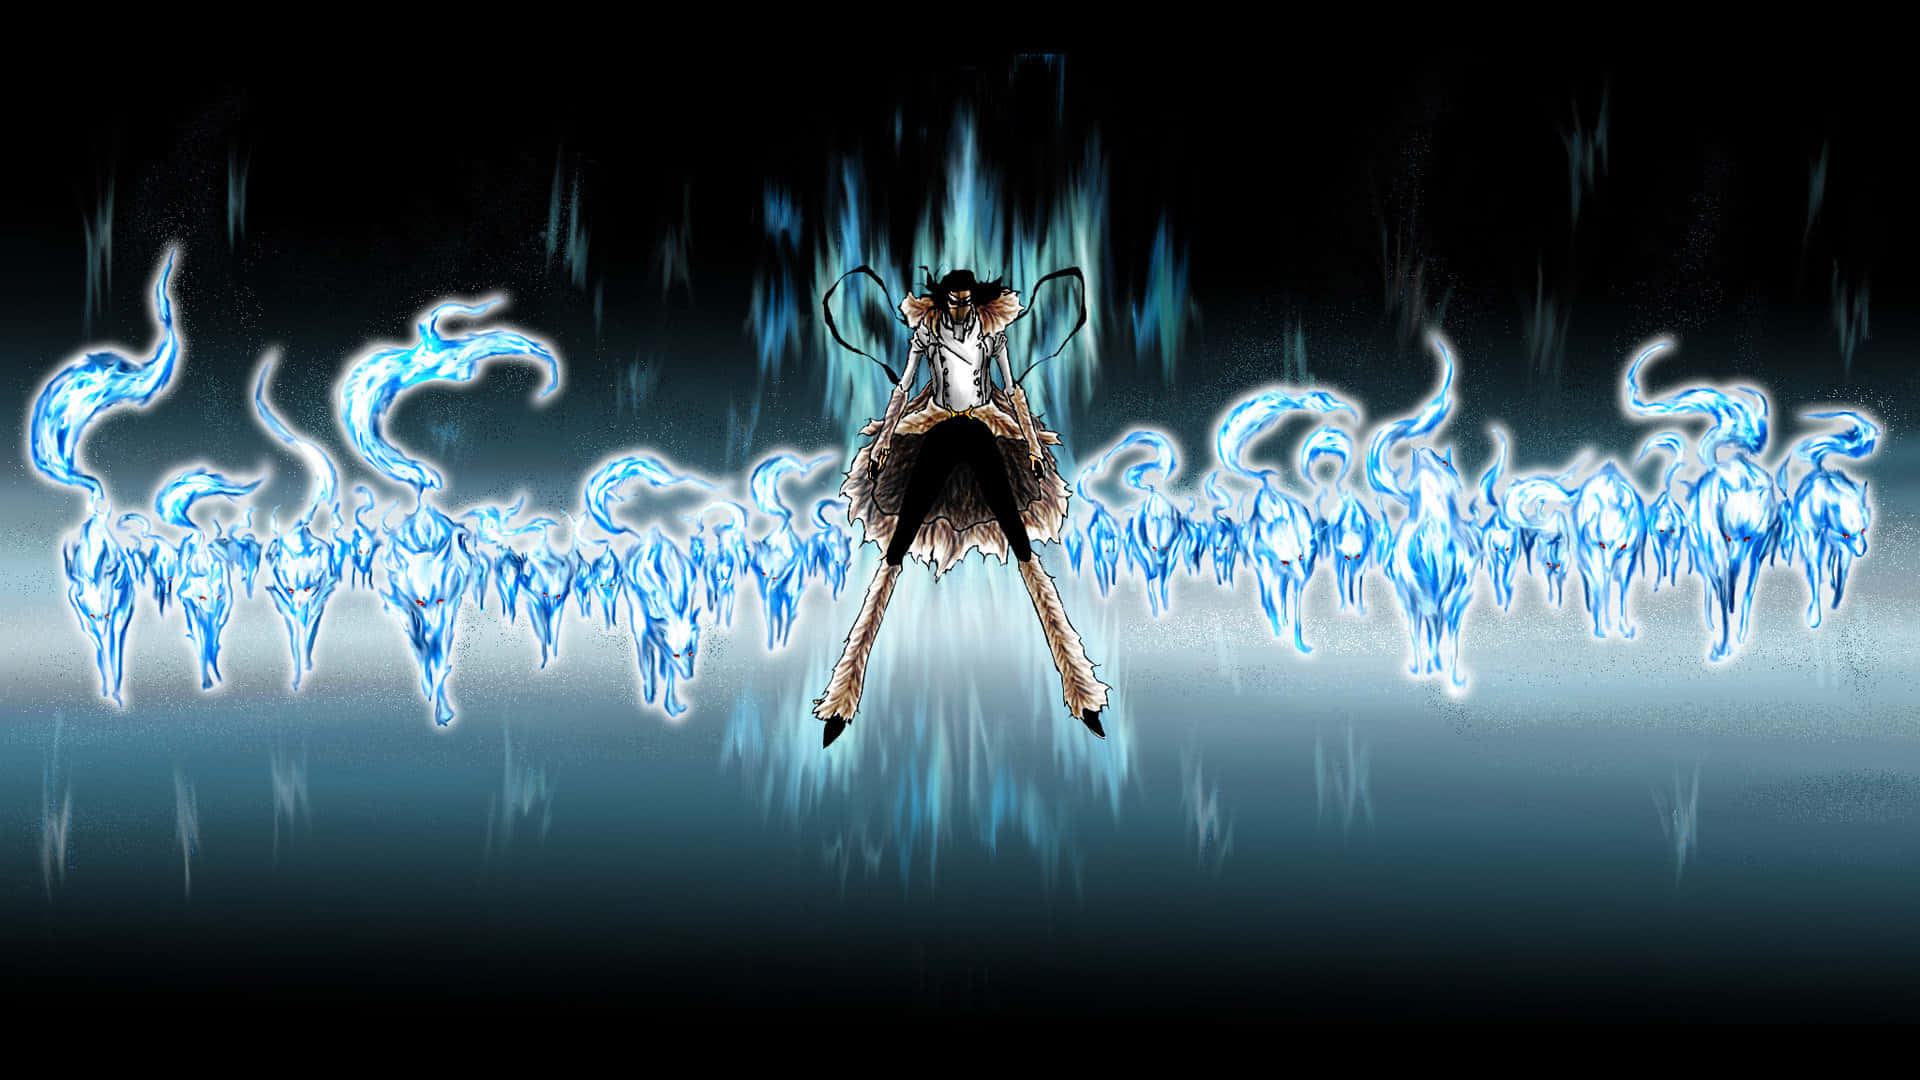 Dark and Powerful, Coyote Starrk Is One Of The Most Feared Arrancar in the Soul Society Wallpaper